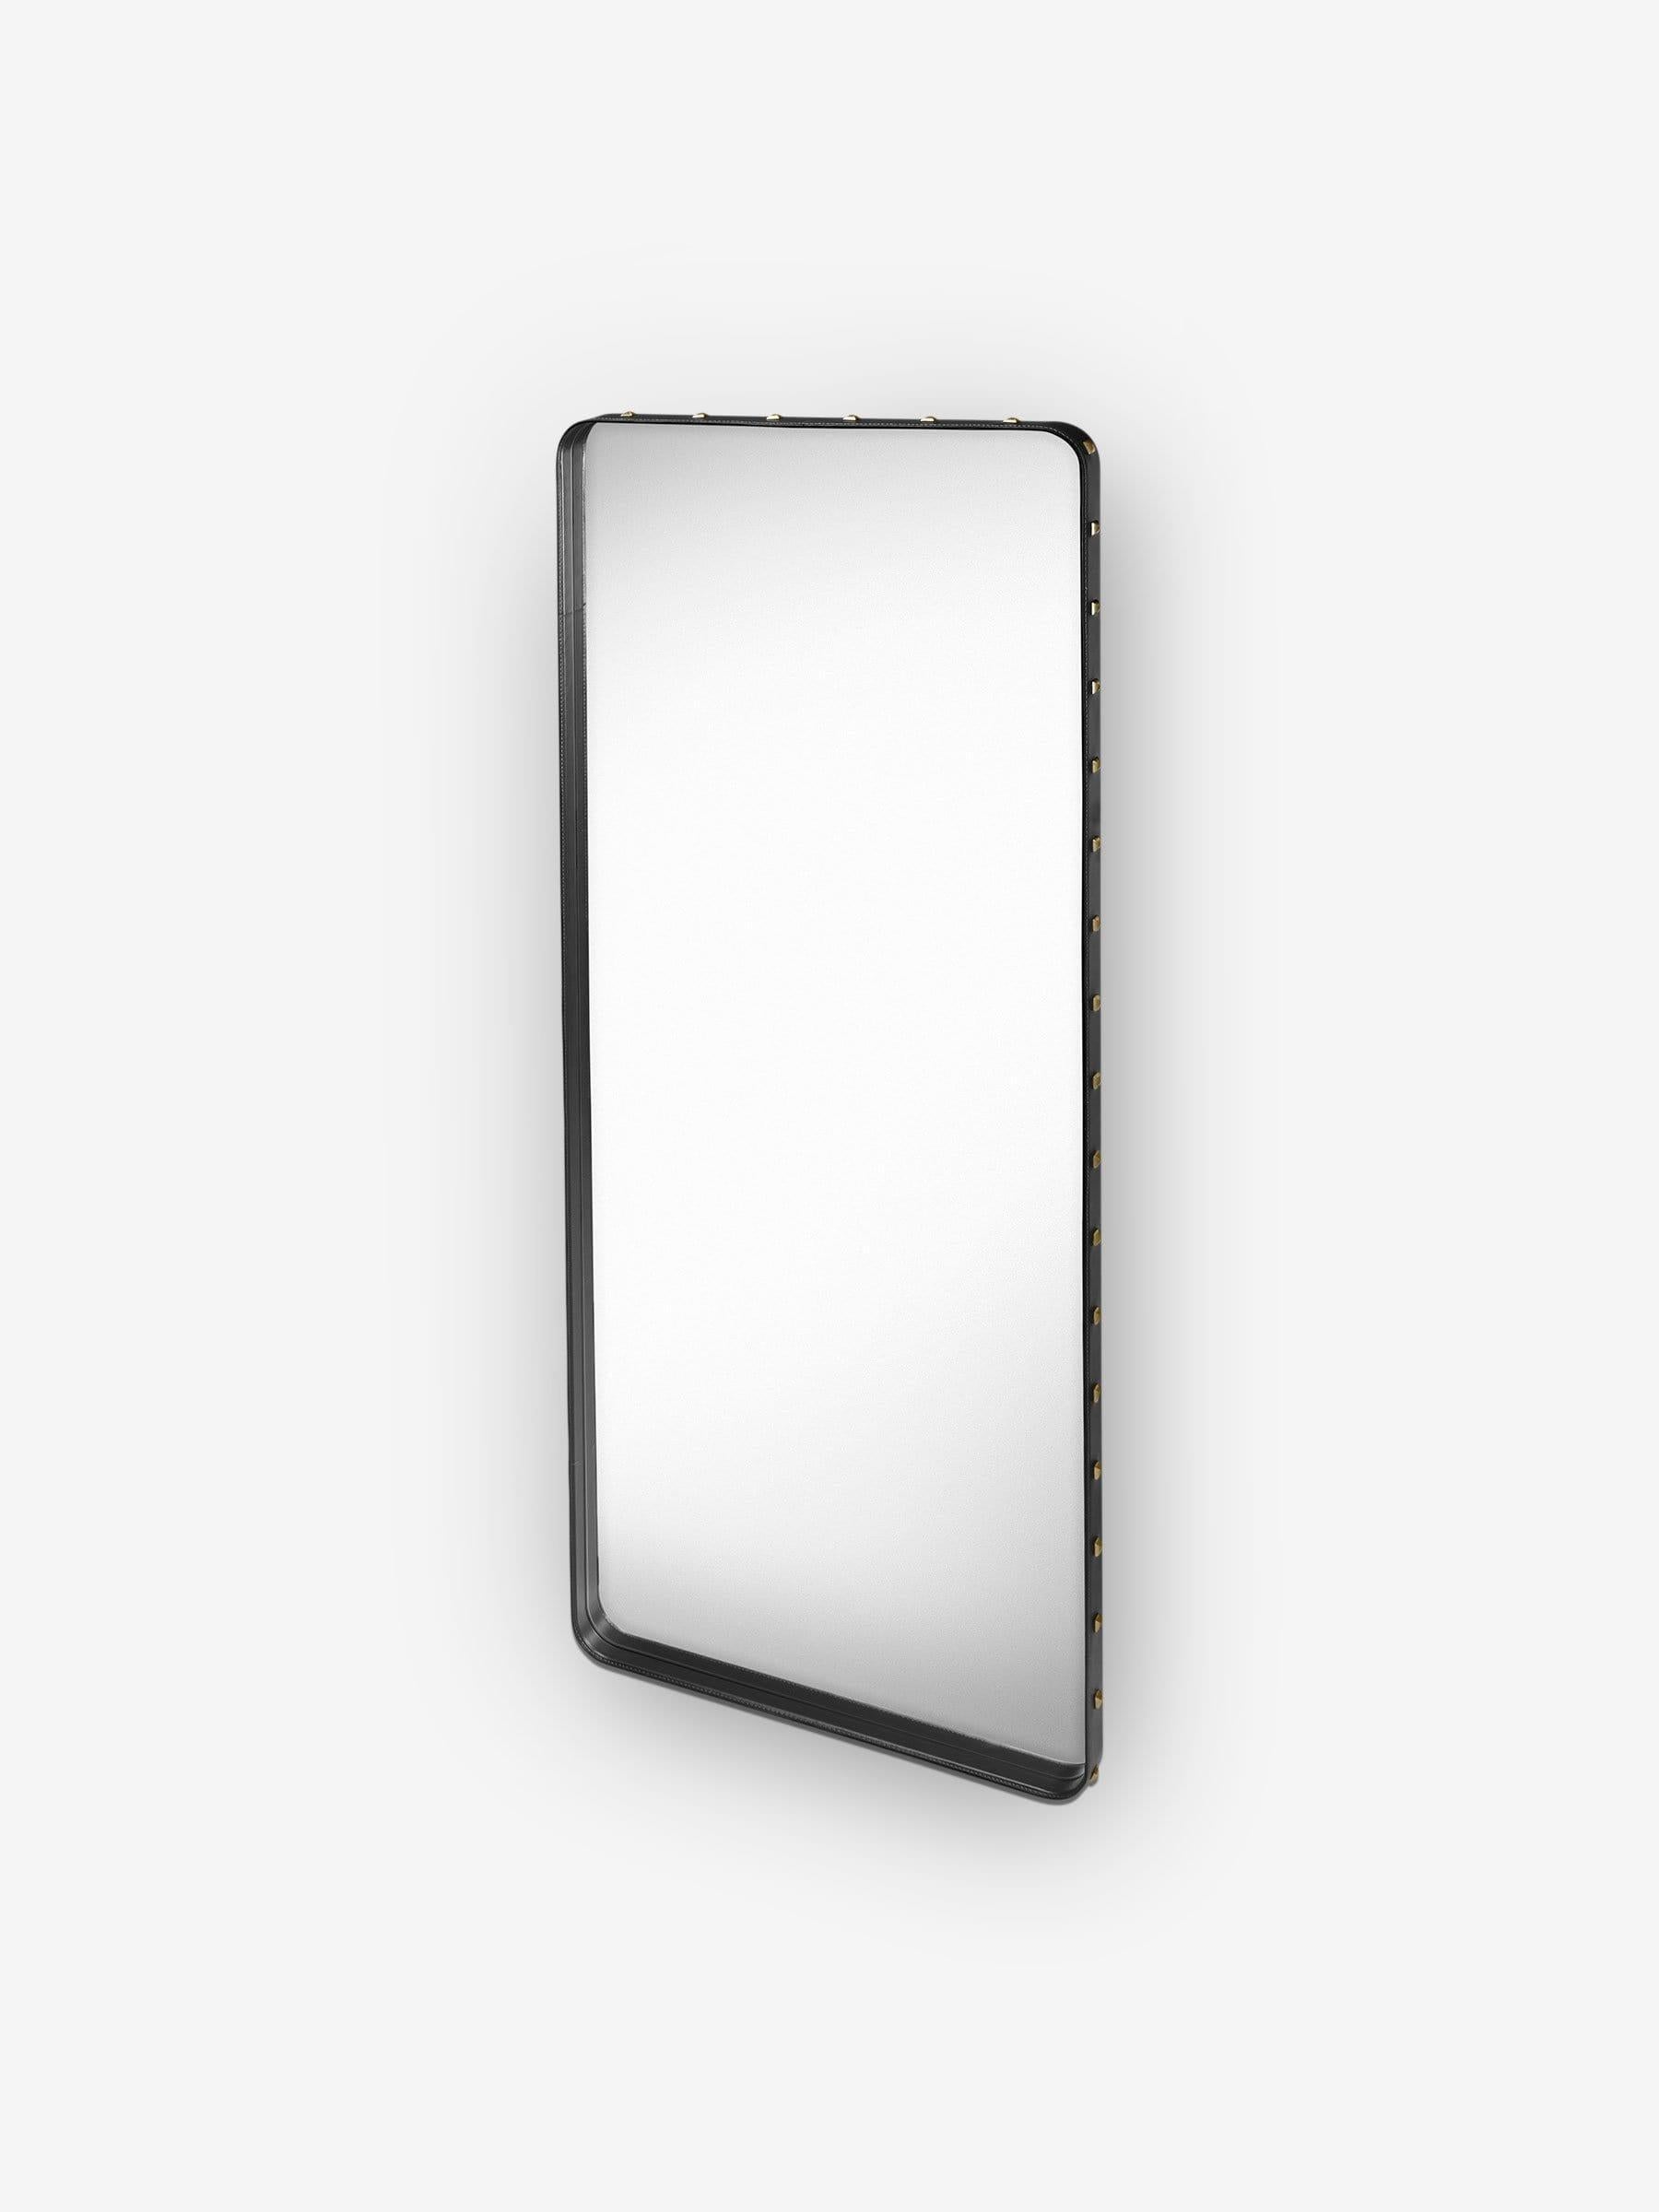 Leather Adnet Rectangular Mirror by Gubi, Large For Sale